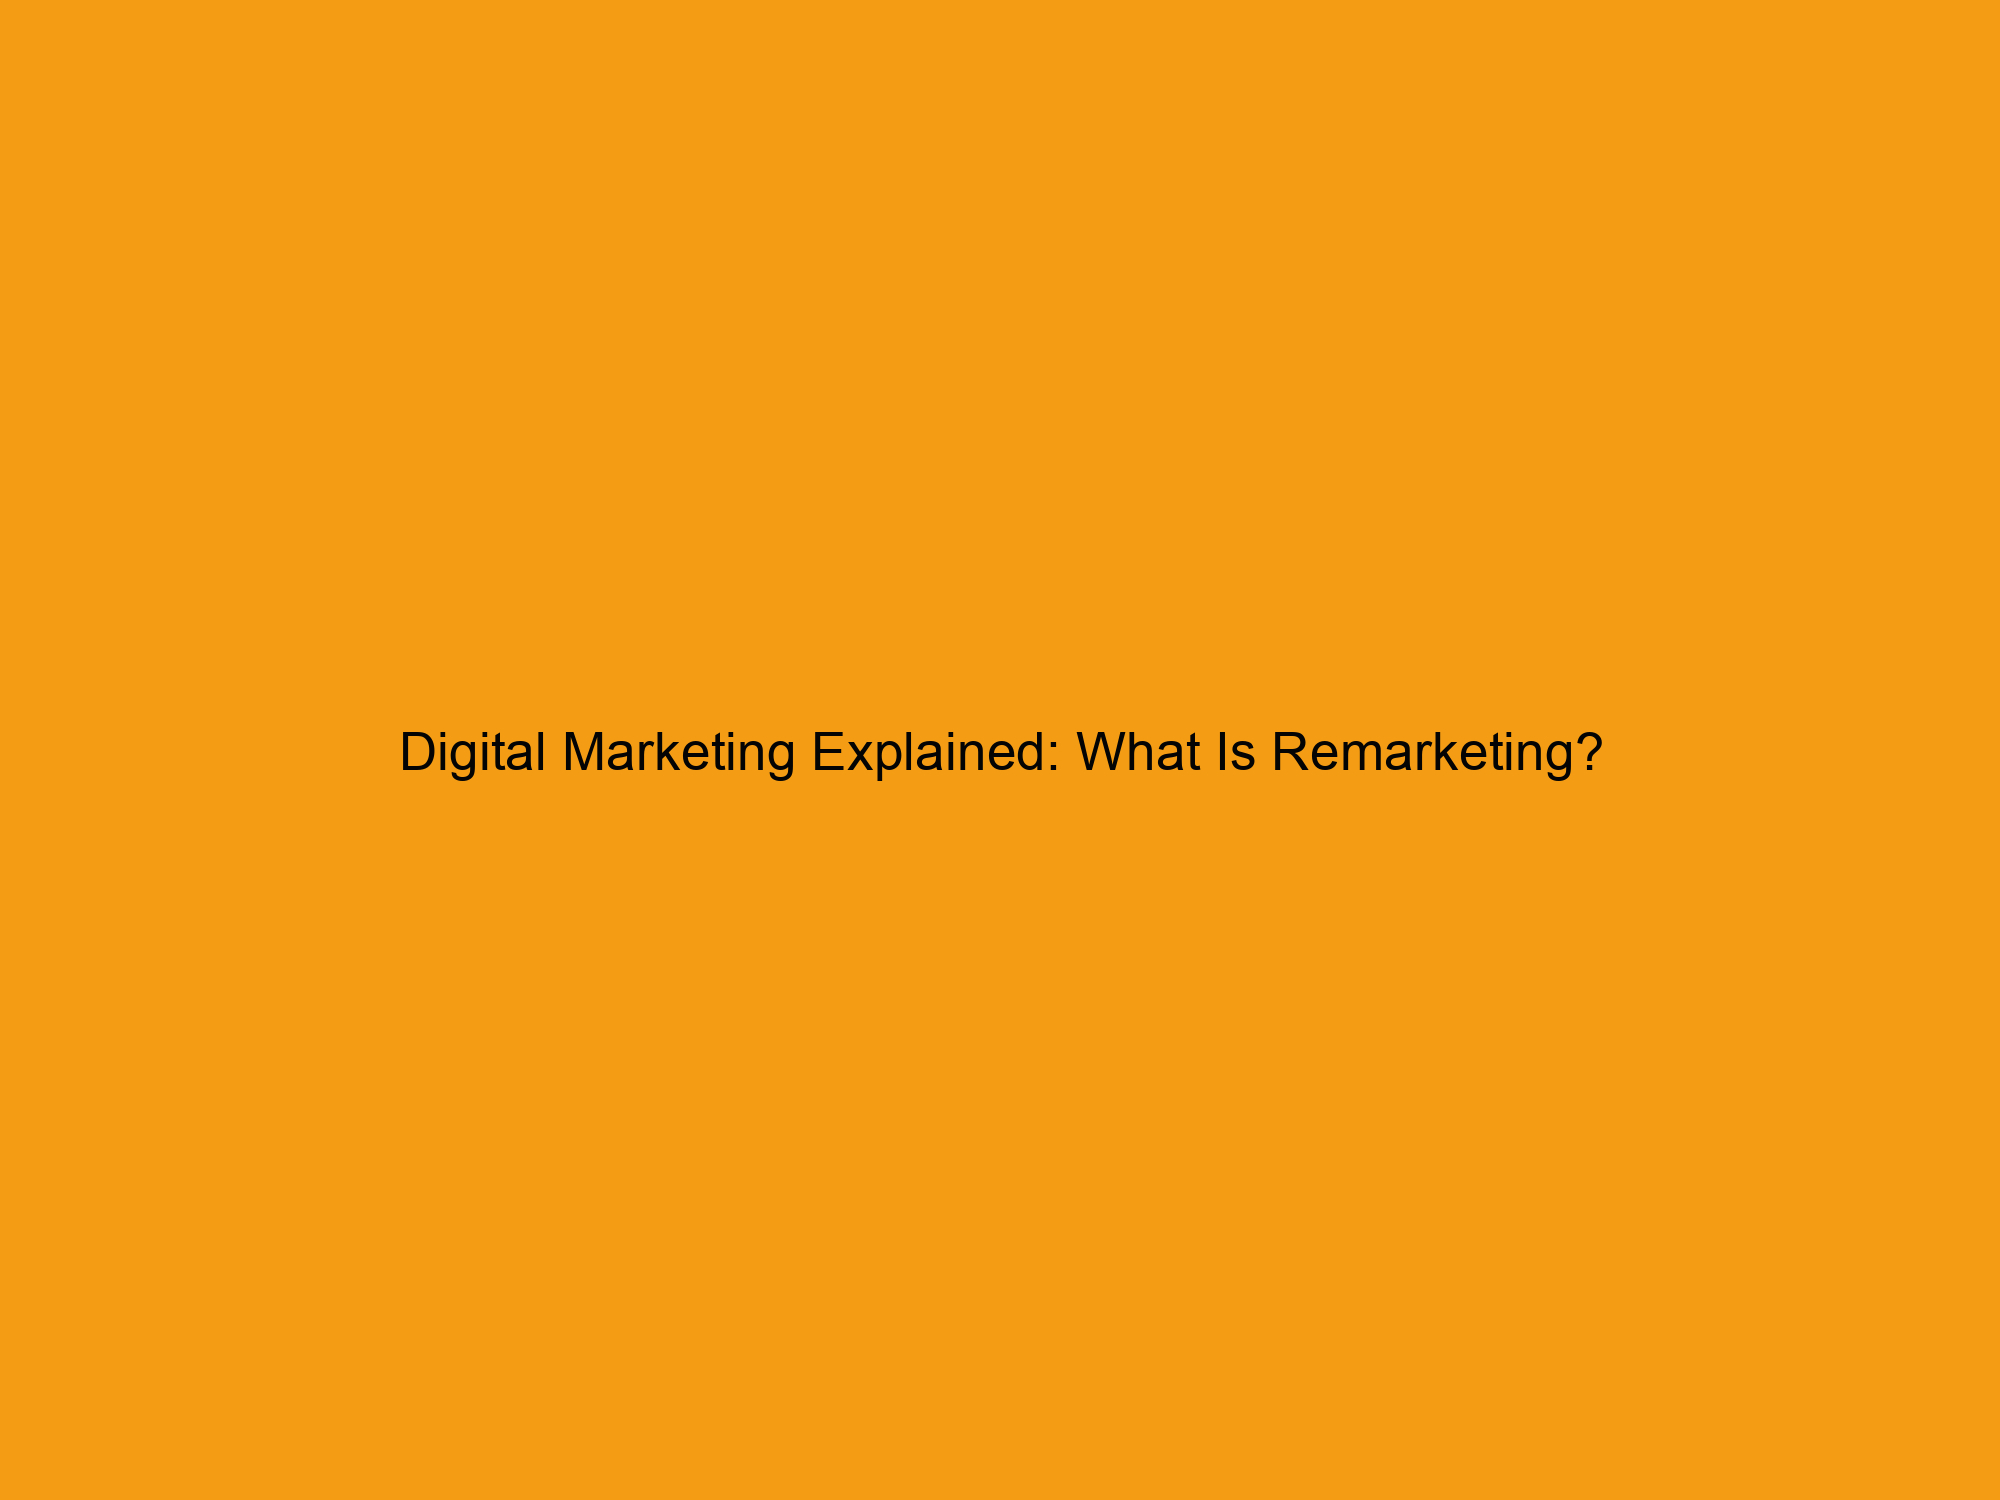 Digital Marketing Explained: What Is Remarketing?